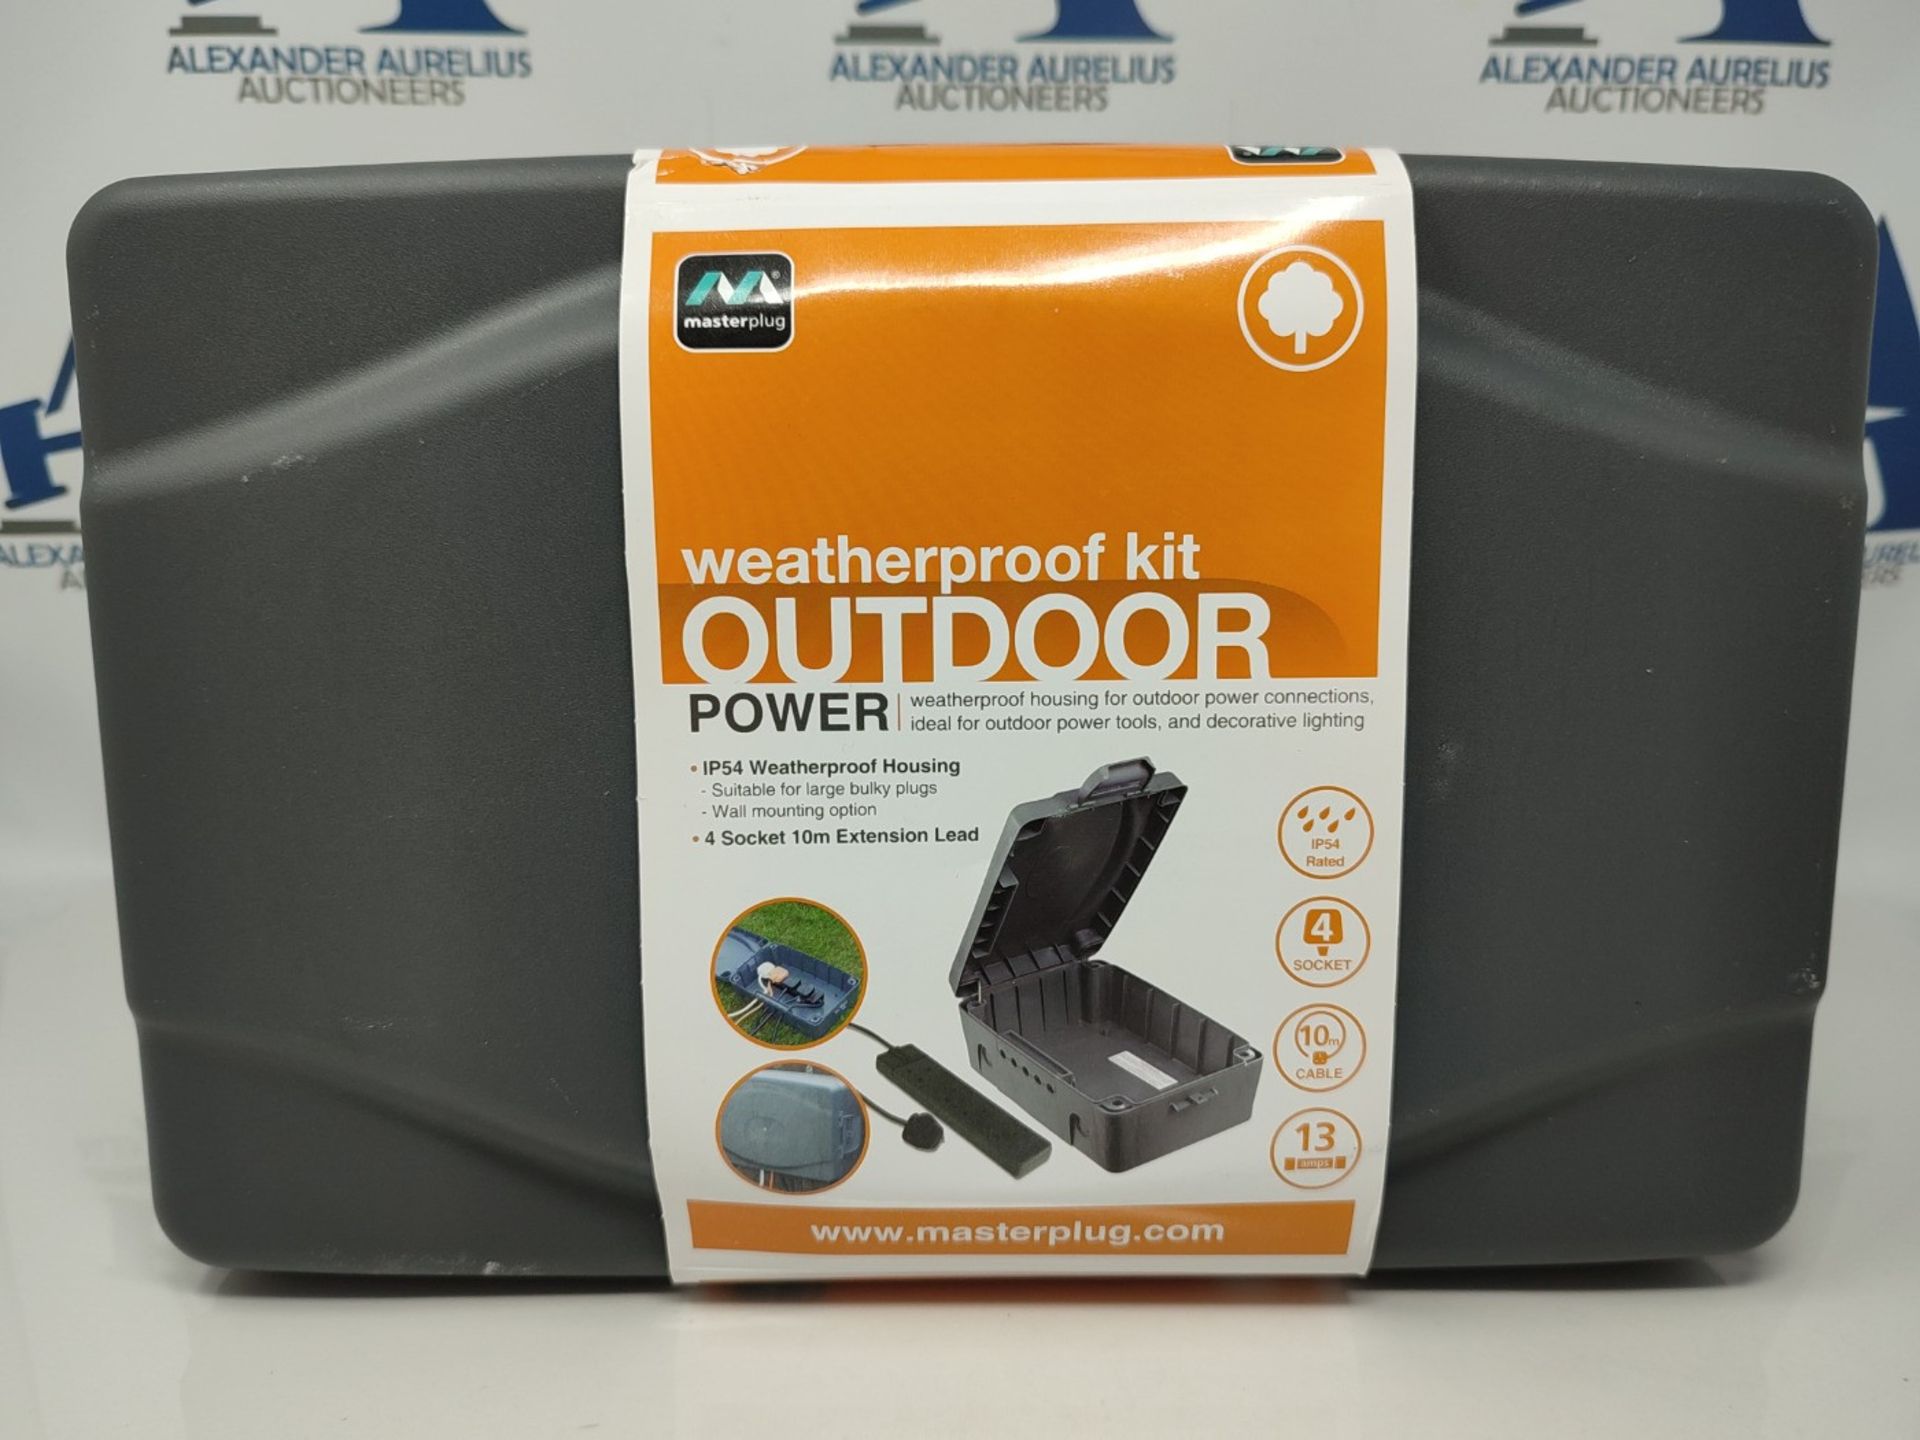 Masterplug WBXBFG10B-MP Weatherproof Electric Box for Outdoors with Four Socket 10 Met - Image 2 of 3